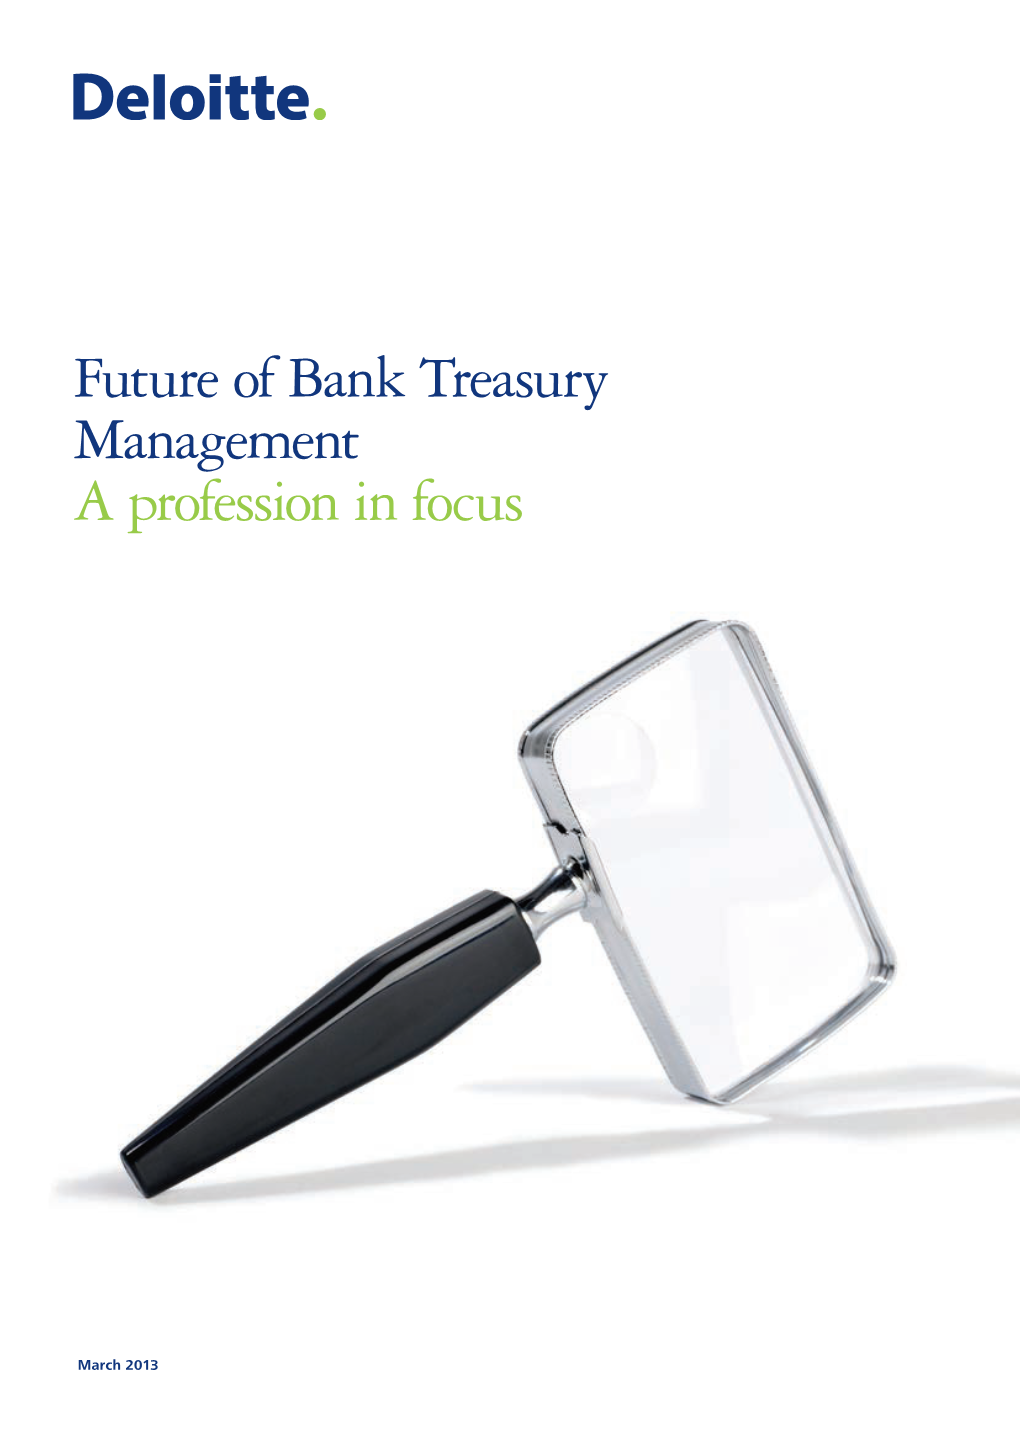 Future of Bank Treasury Management a Profession in Focus